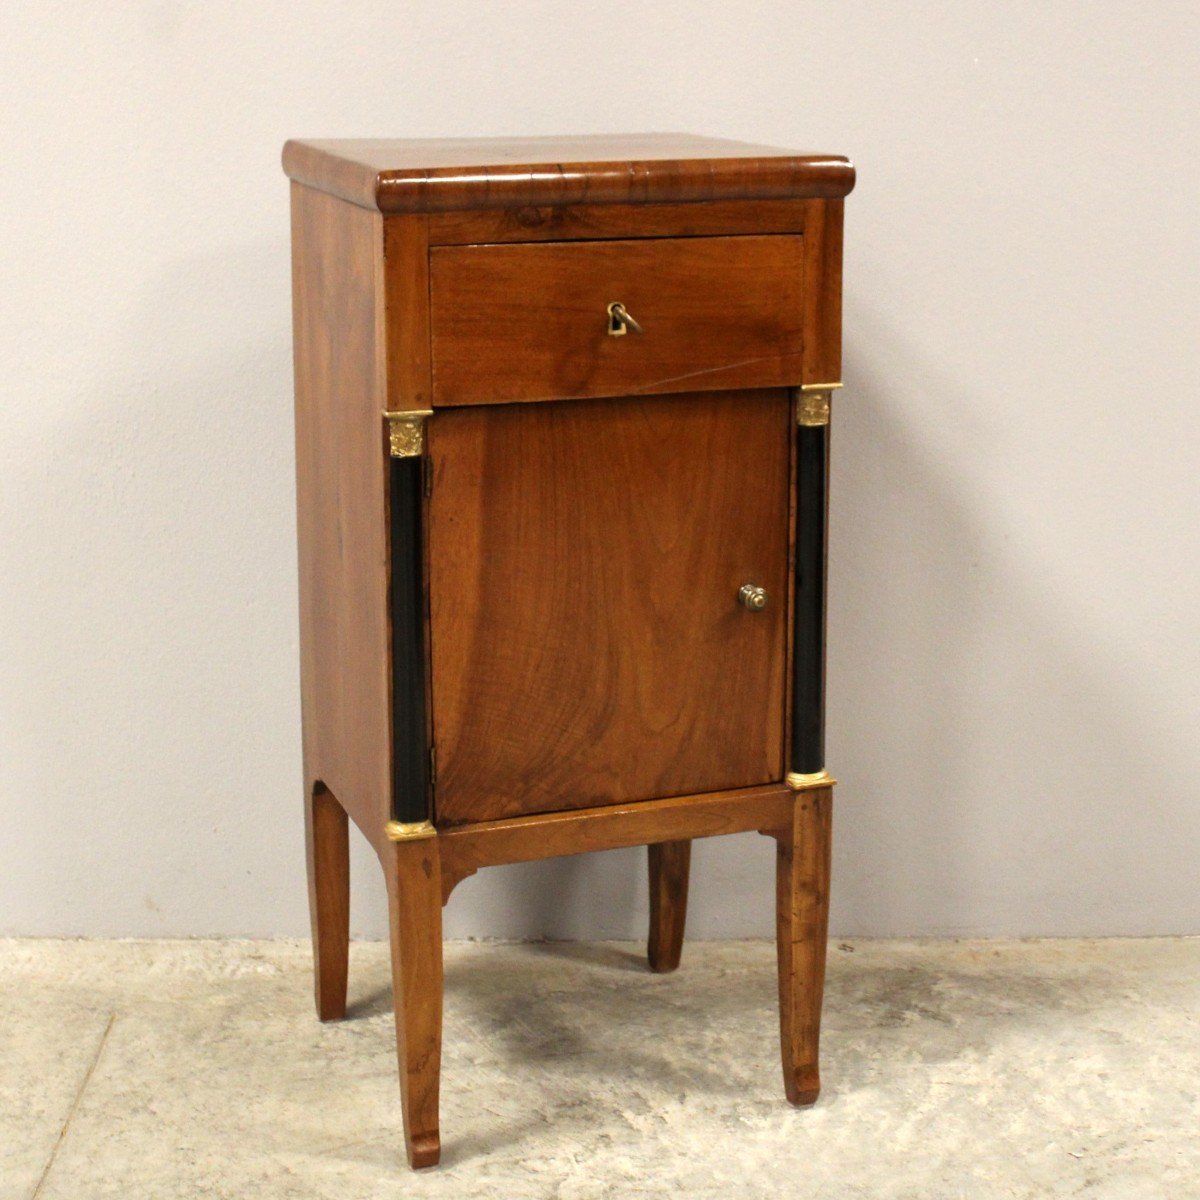 Antique Directoire Bedside Nightstand Table In Walnut - Italy 18th-photo-2